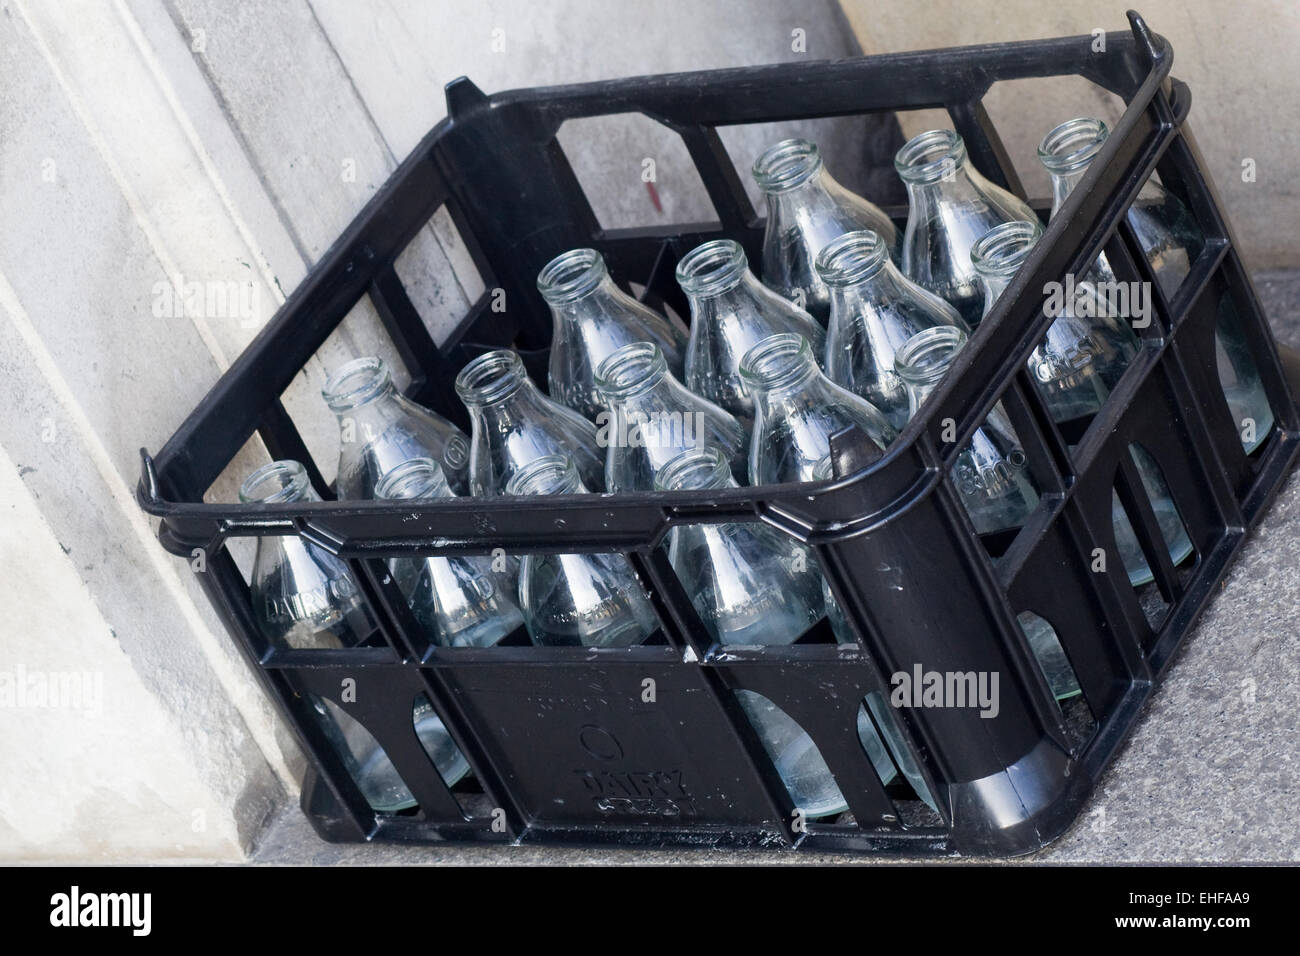 Empty traditional milk bottles in a crate on a door step Stock Photo